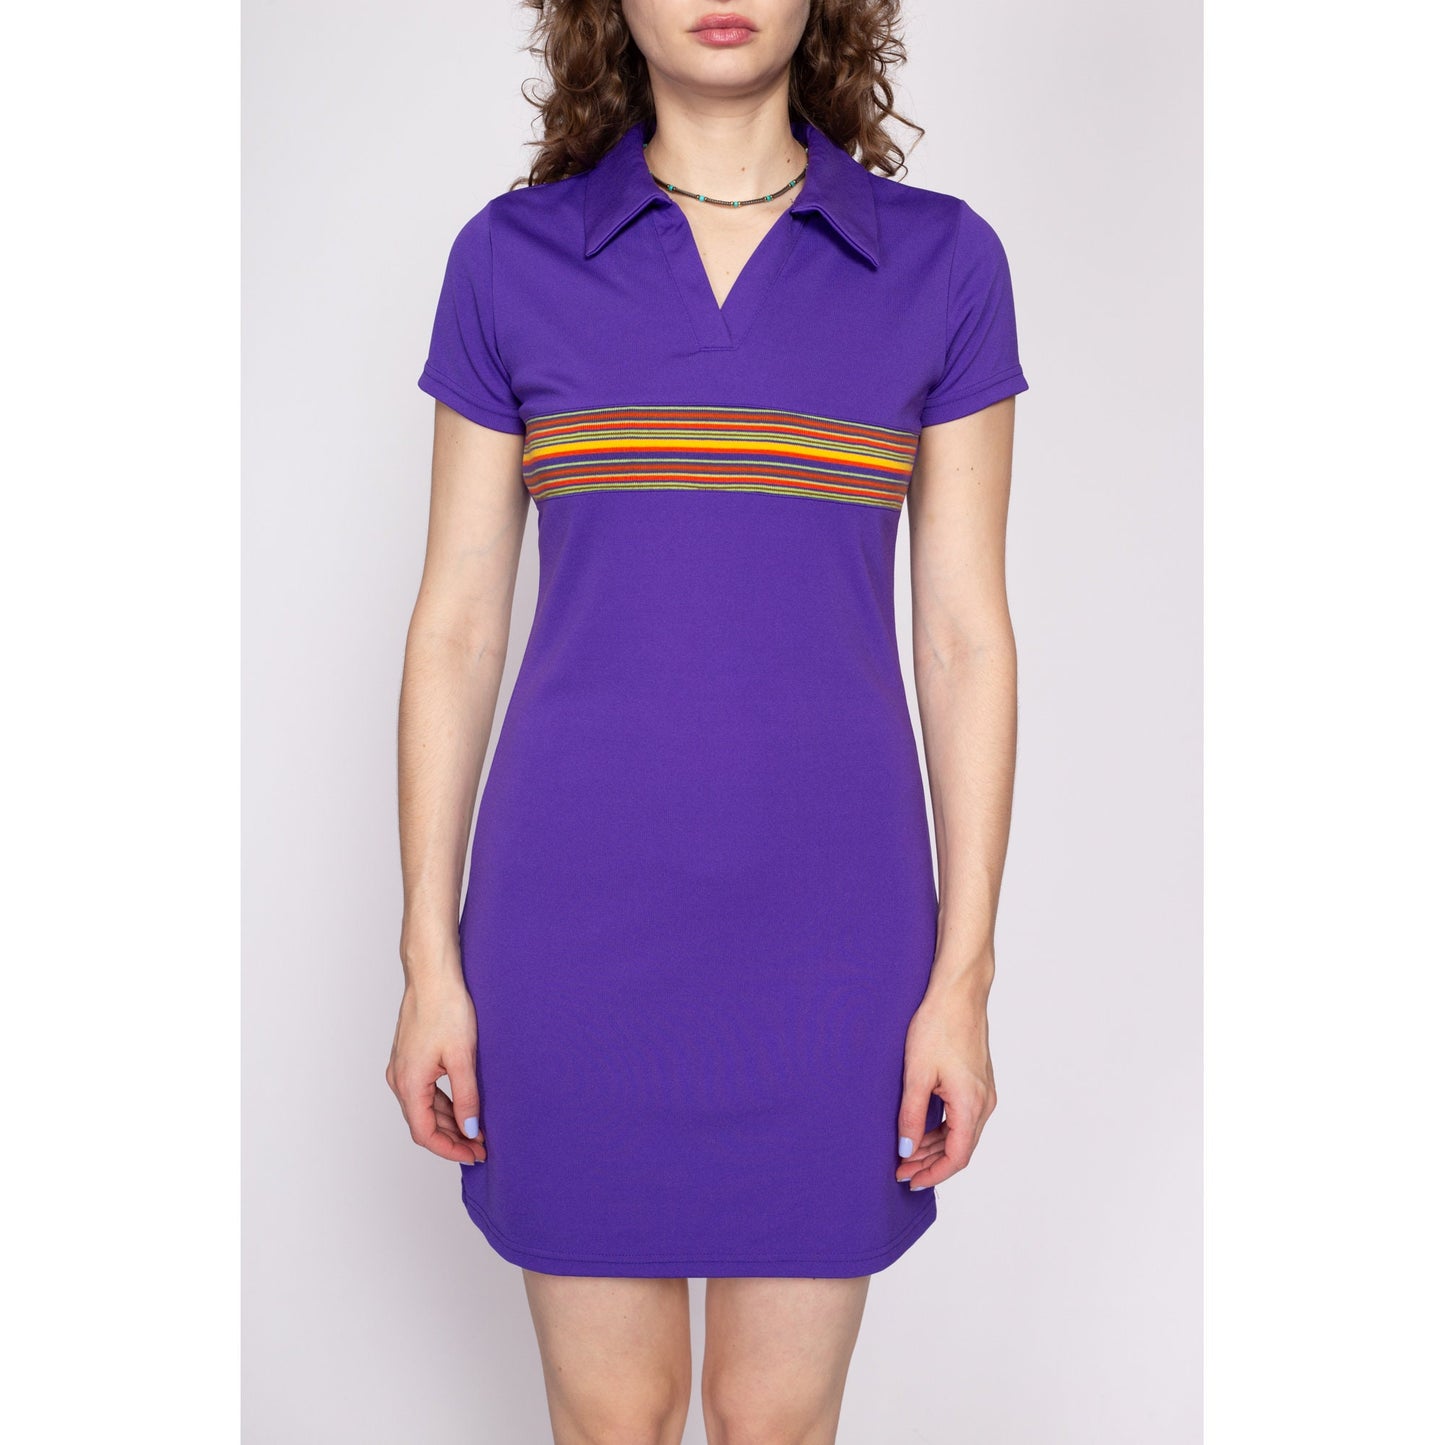 90s Express Preppy Polo Mini Dress - Small | Vintage Sporty Purple Striped Collared Short Sleeve Shirtdress